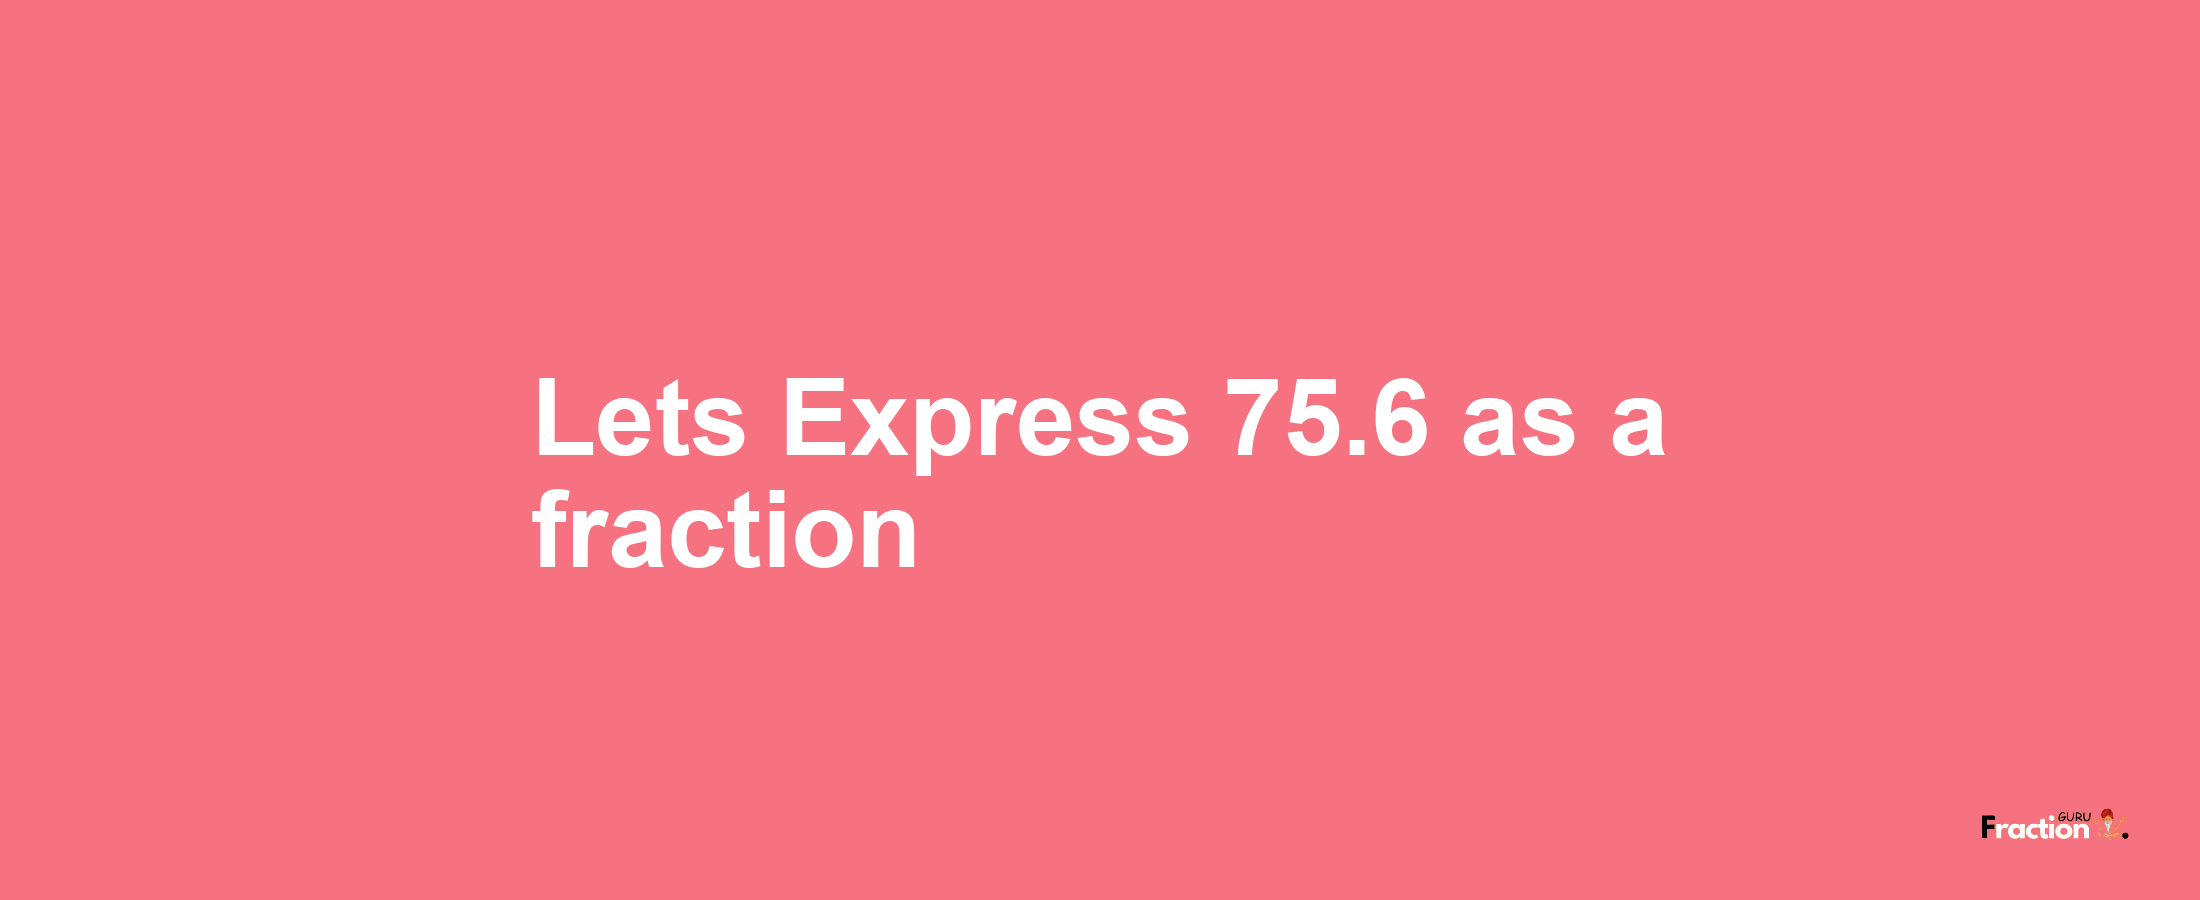 Lets Express 75.6 as afraction